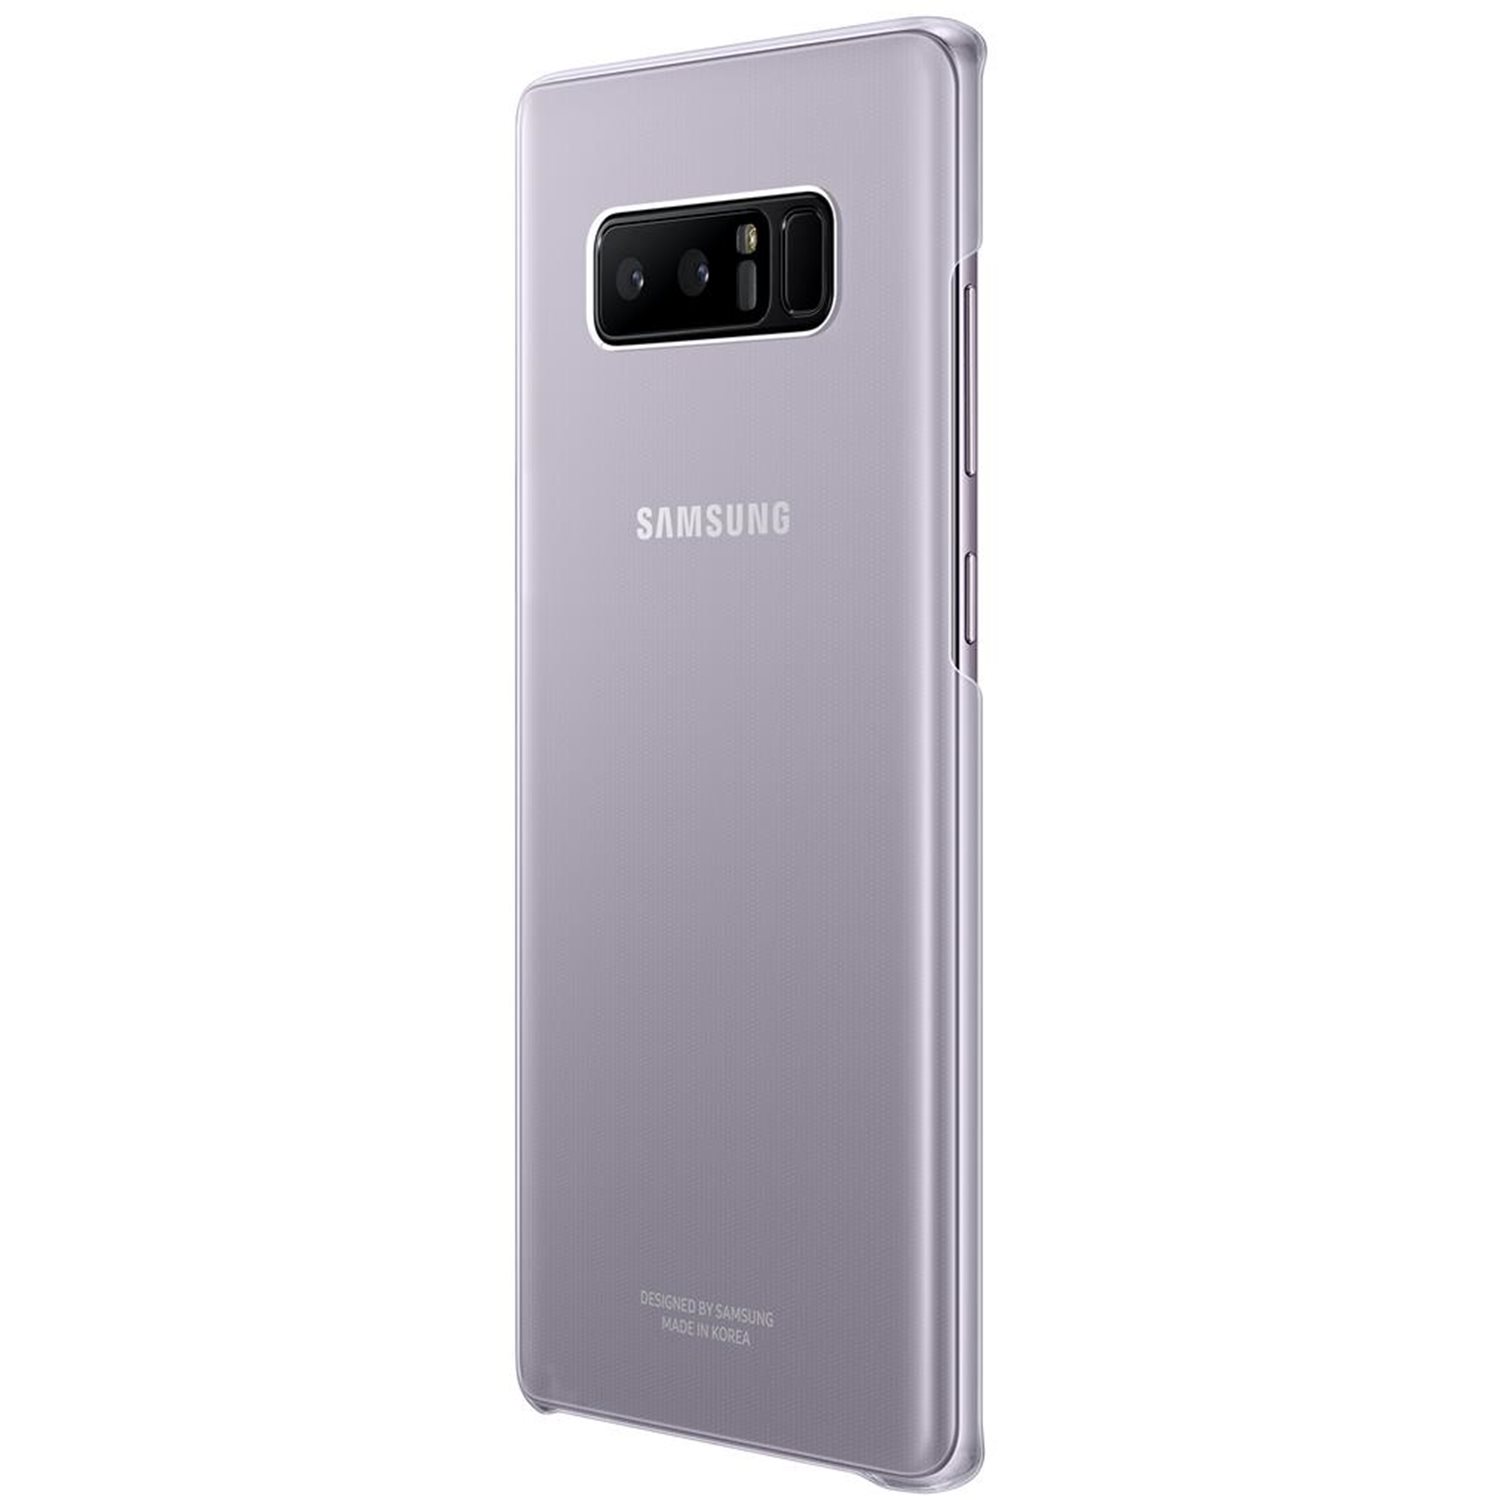 Official Samsung Galaxy Note 8 Clear Cover Case - Orchid Grey